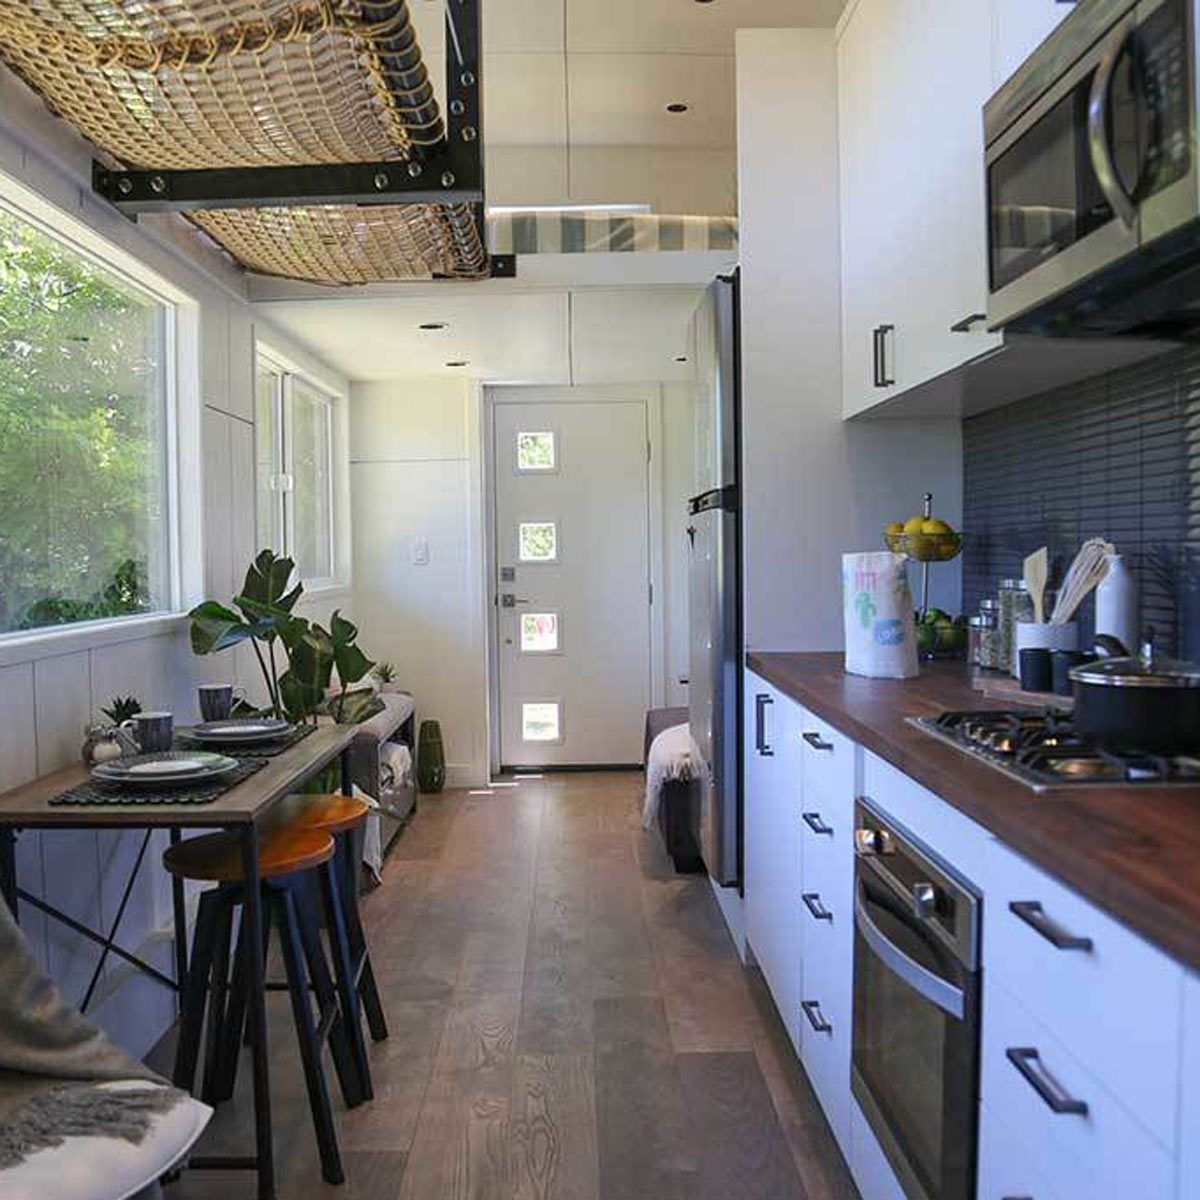 This Tiny Home Kitchen is Roomy